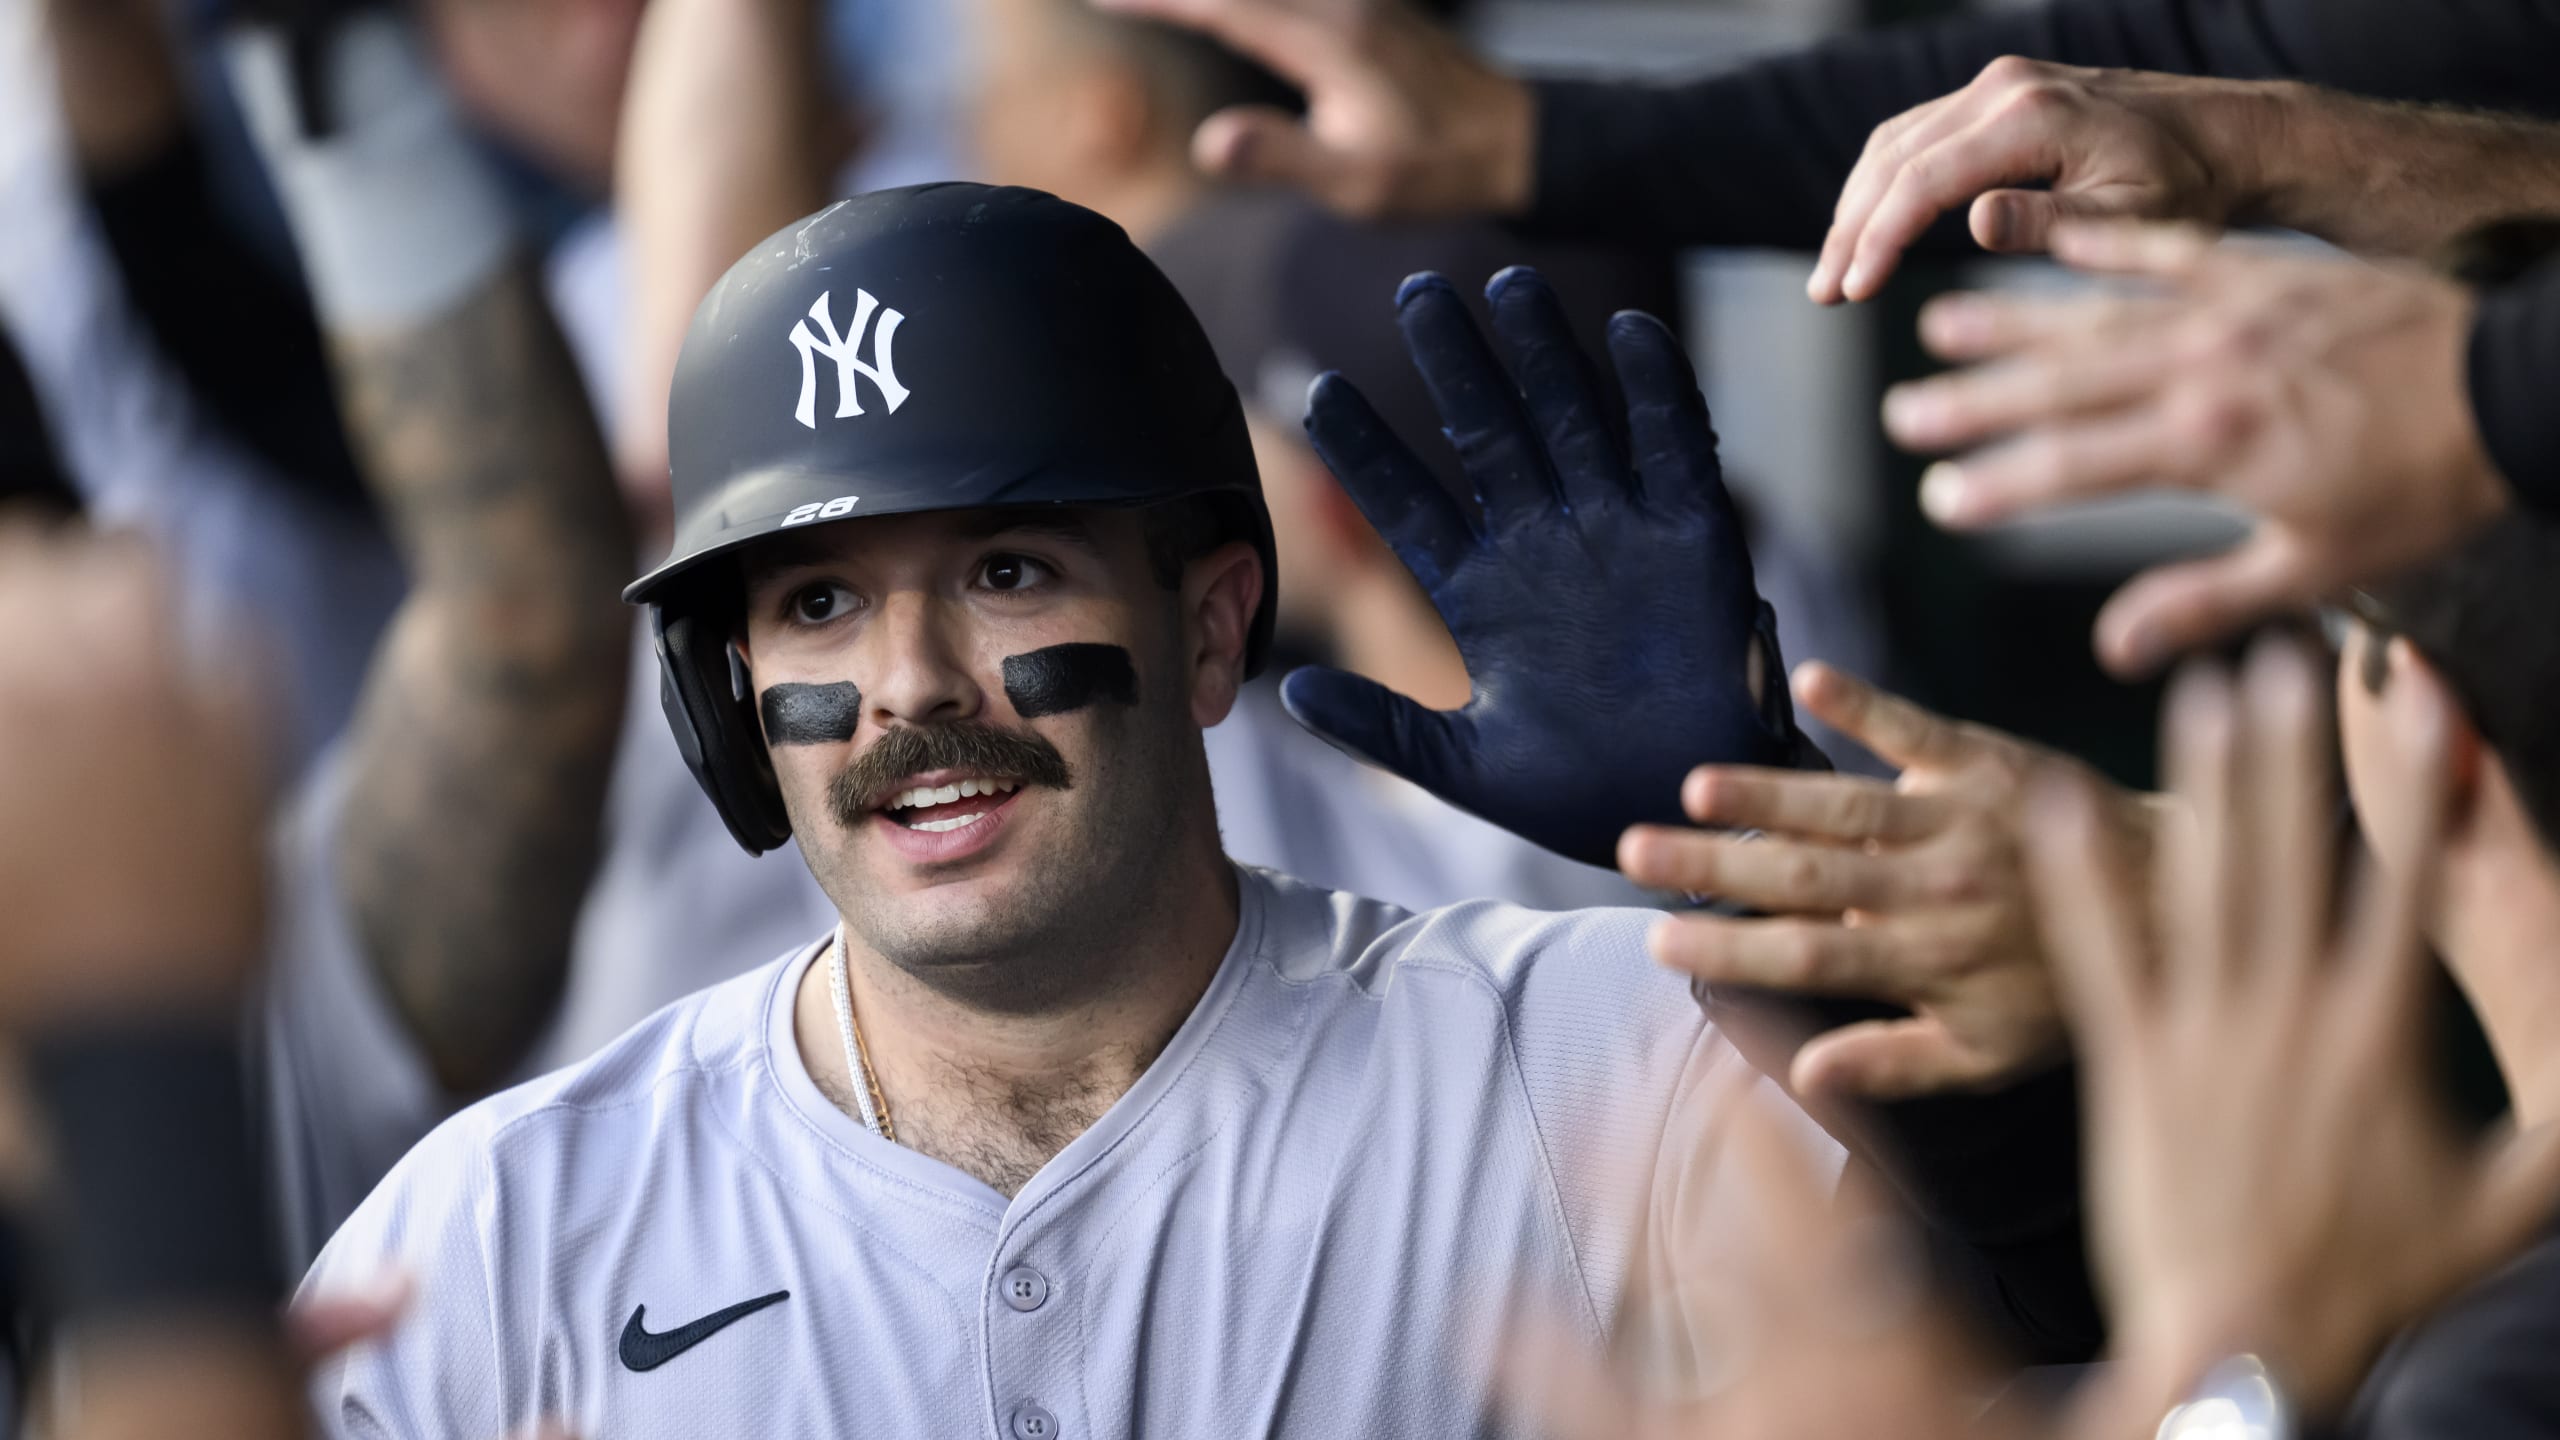 Yankees hit three homers in easy 10-1 win over Royals - Pinstripe Alley